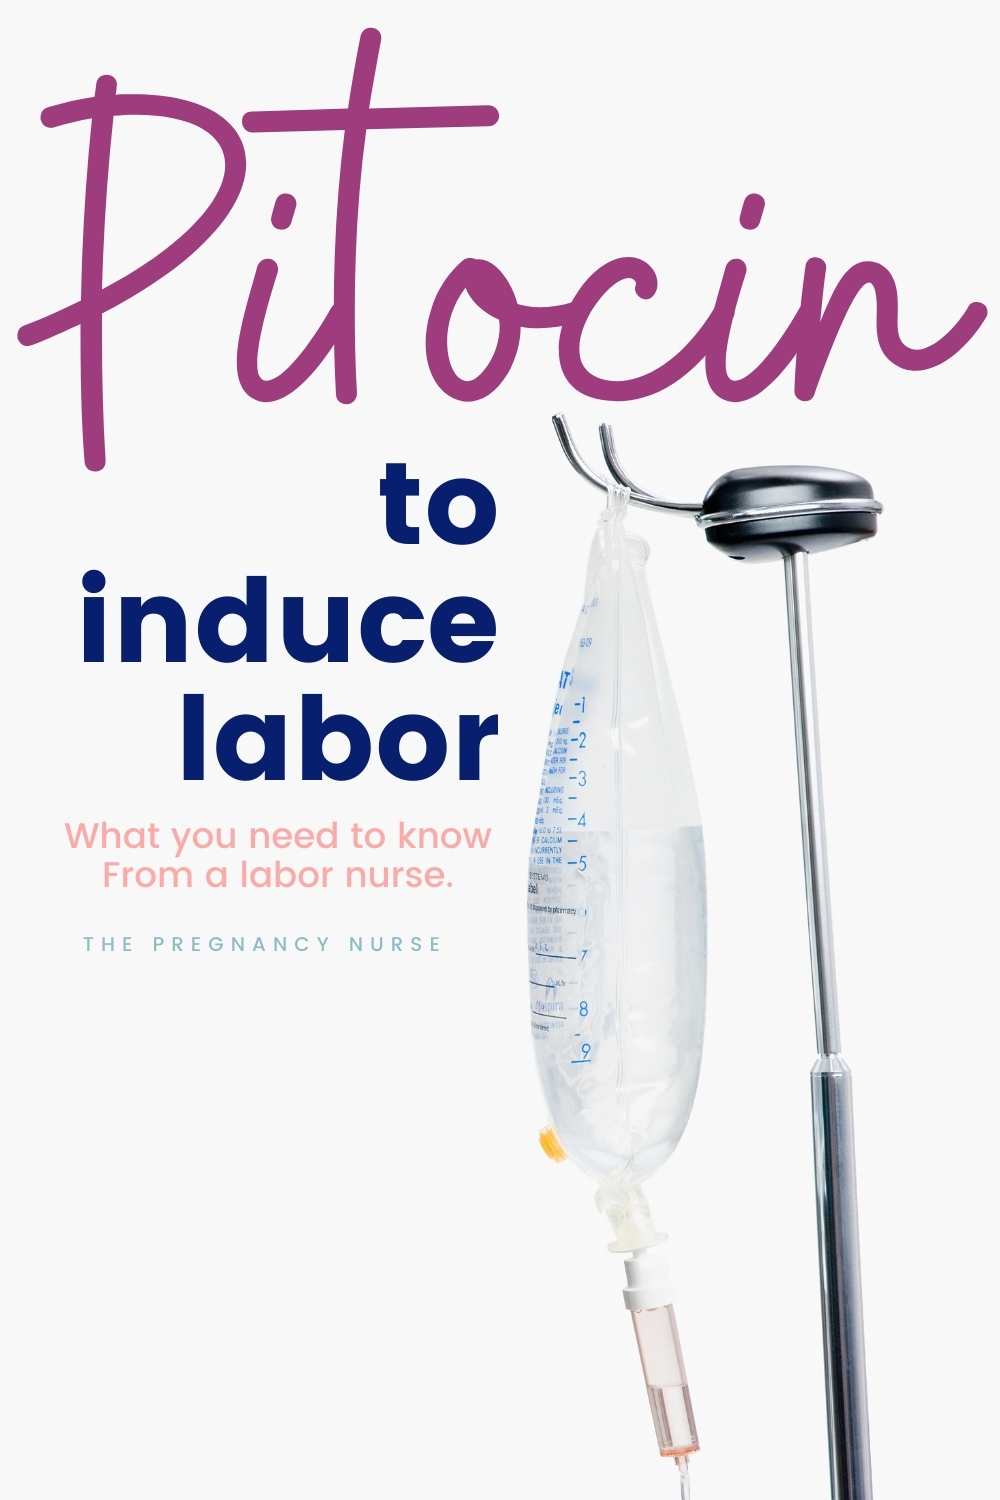 Pitocin or Oxytocin is a hormone your body produces to start things like labor, breastfeeding and more. Your body has been producing it for you for YEARS, so why is the internet so full of negativity about this hormone when used to start labor? Let’s talk about it.